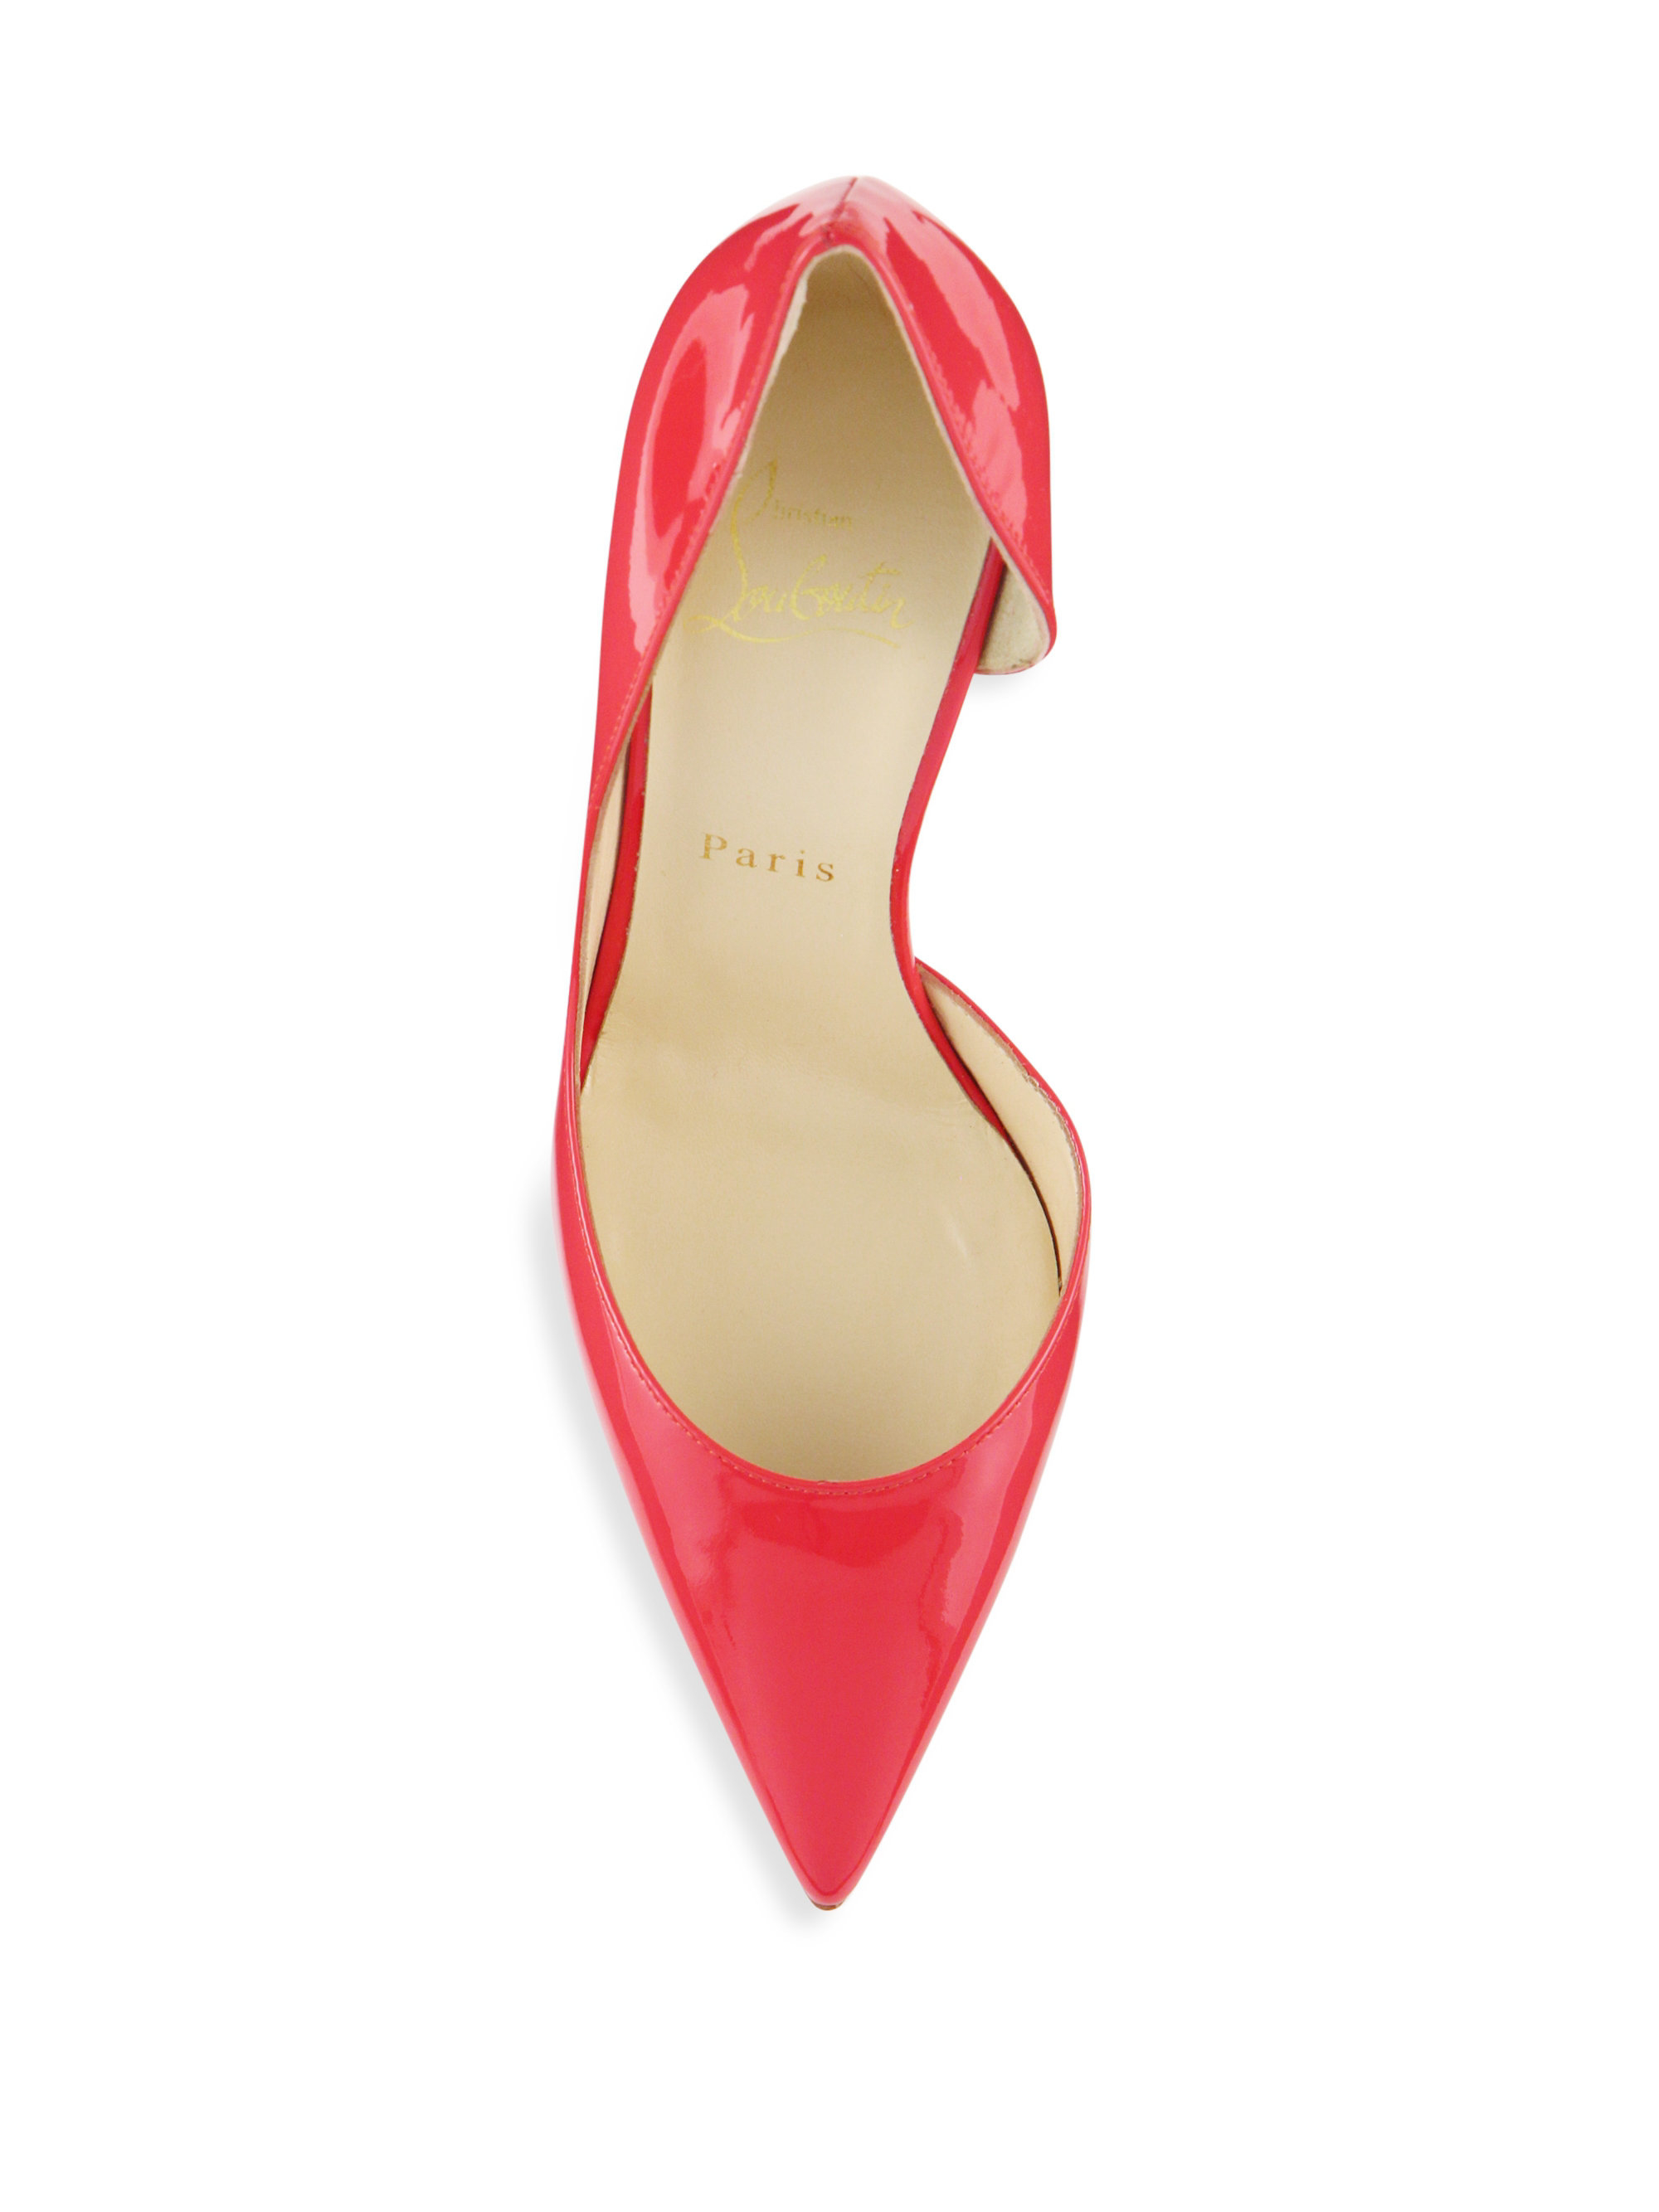 Christian louboutin Iriza Patent Leather Half D\u0026#39;orsay Pumps in Red ...